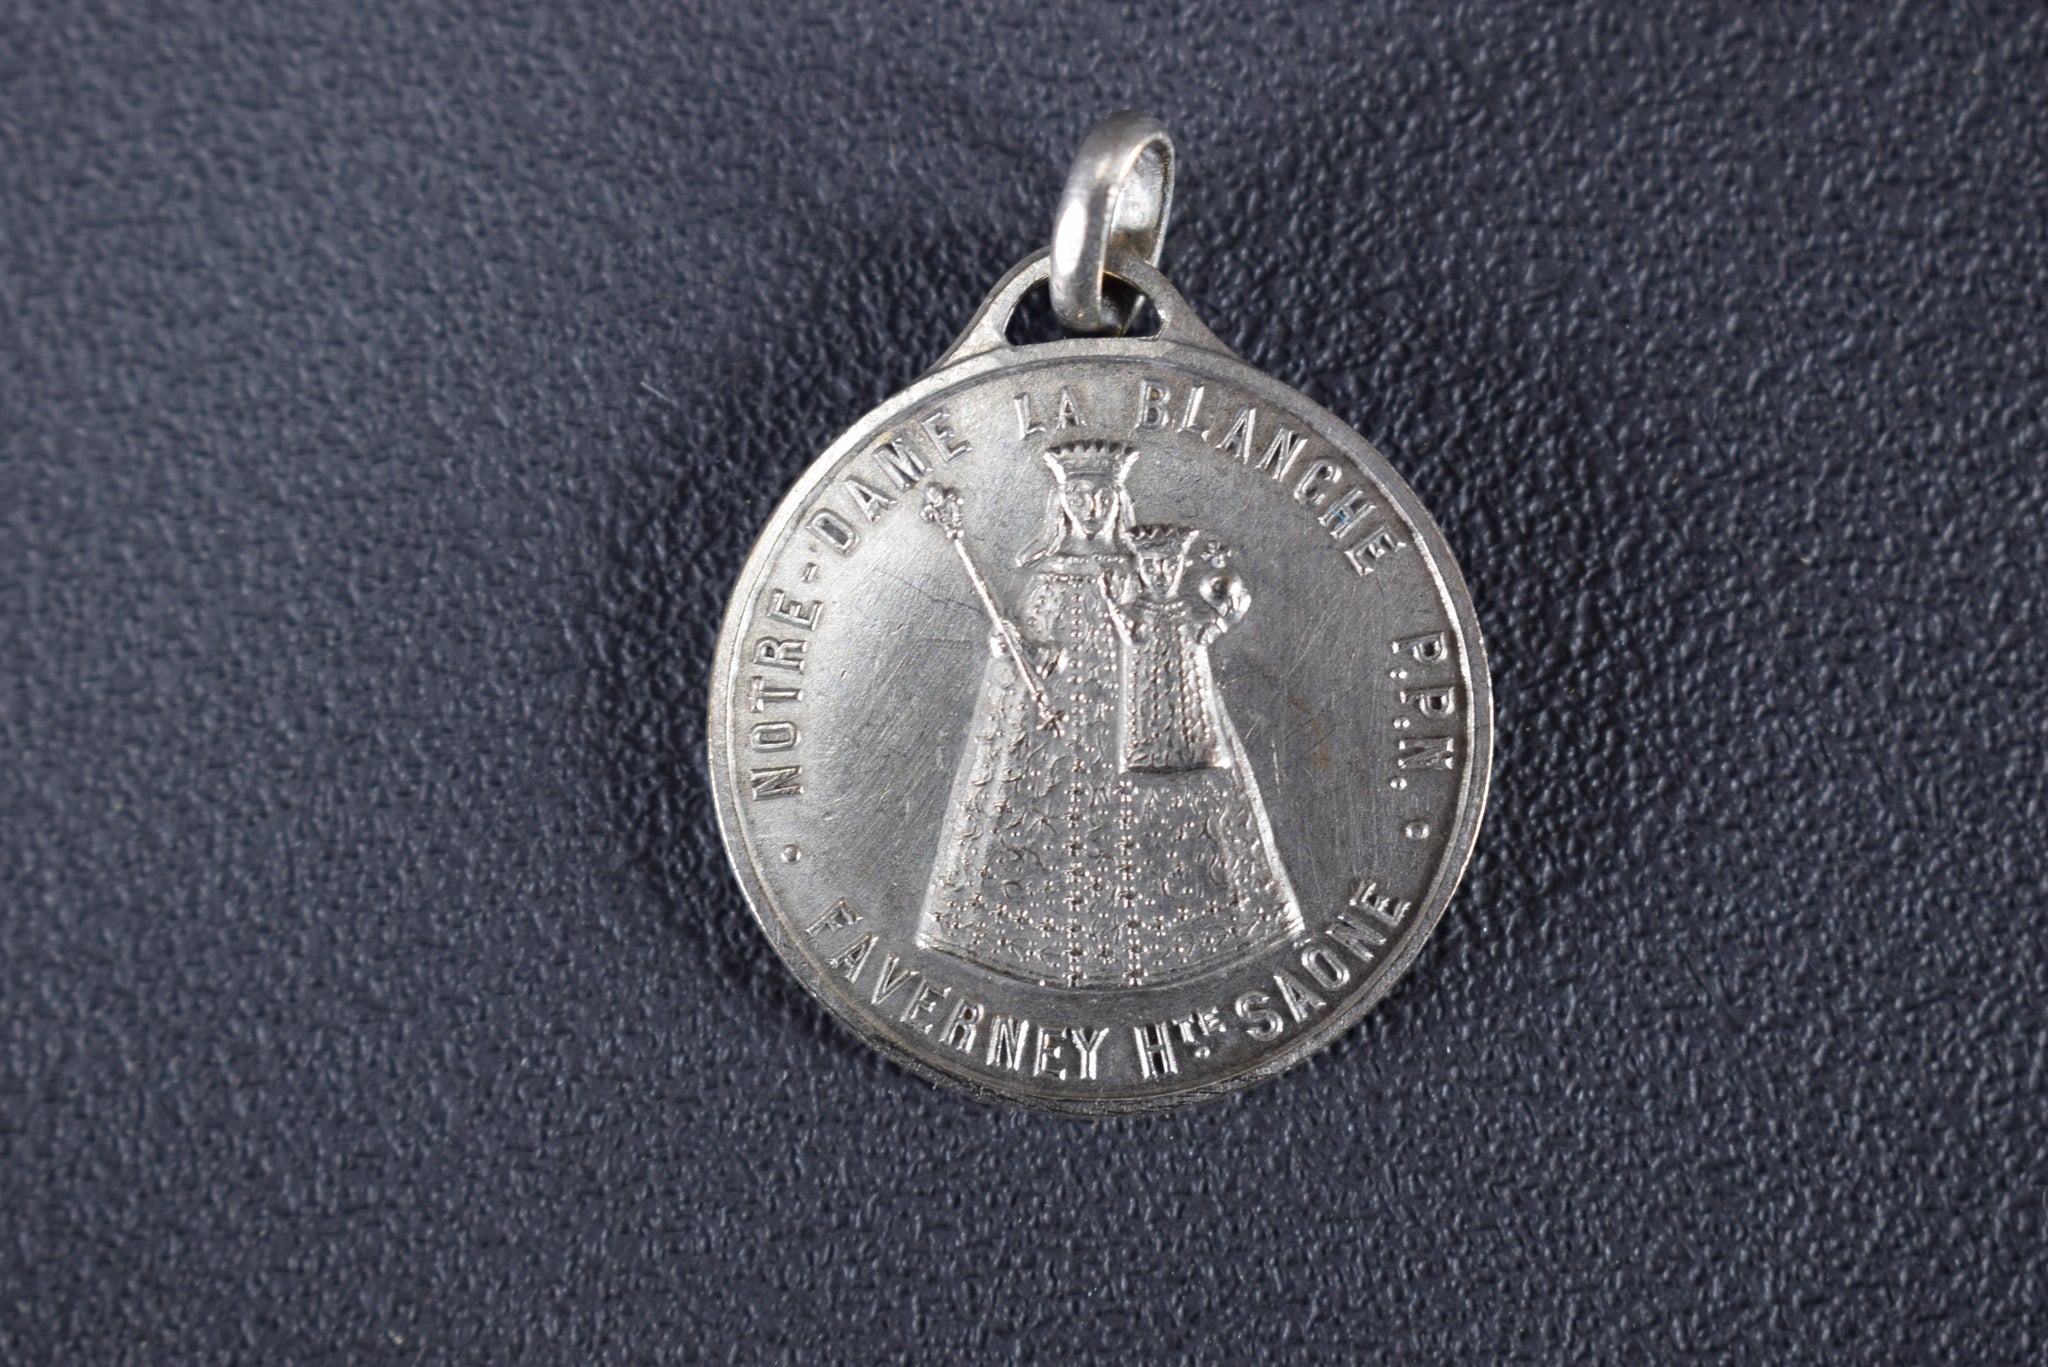 Faverney Miracle medal